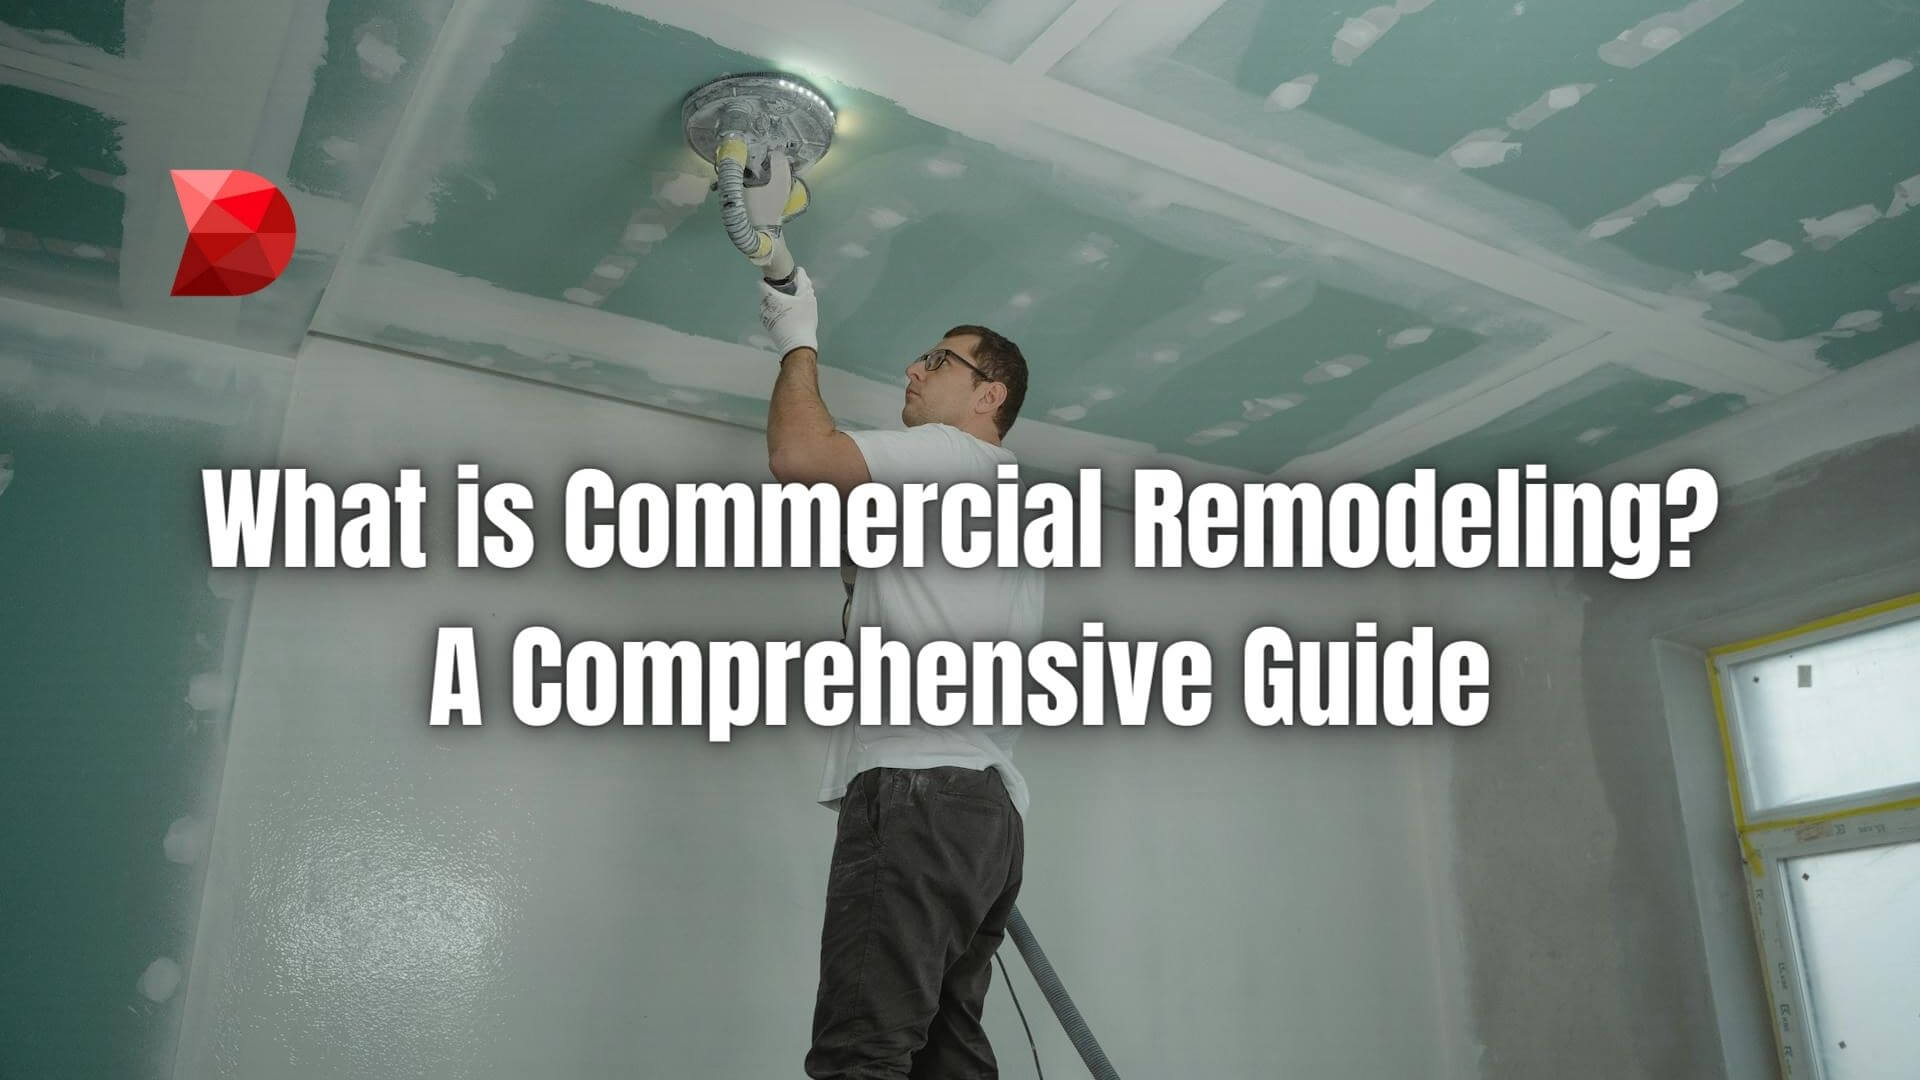 Elevate your commercial space with our essential remodeling guide. Learn key strategies and tips for a successful renovation journey.